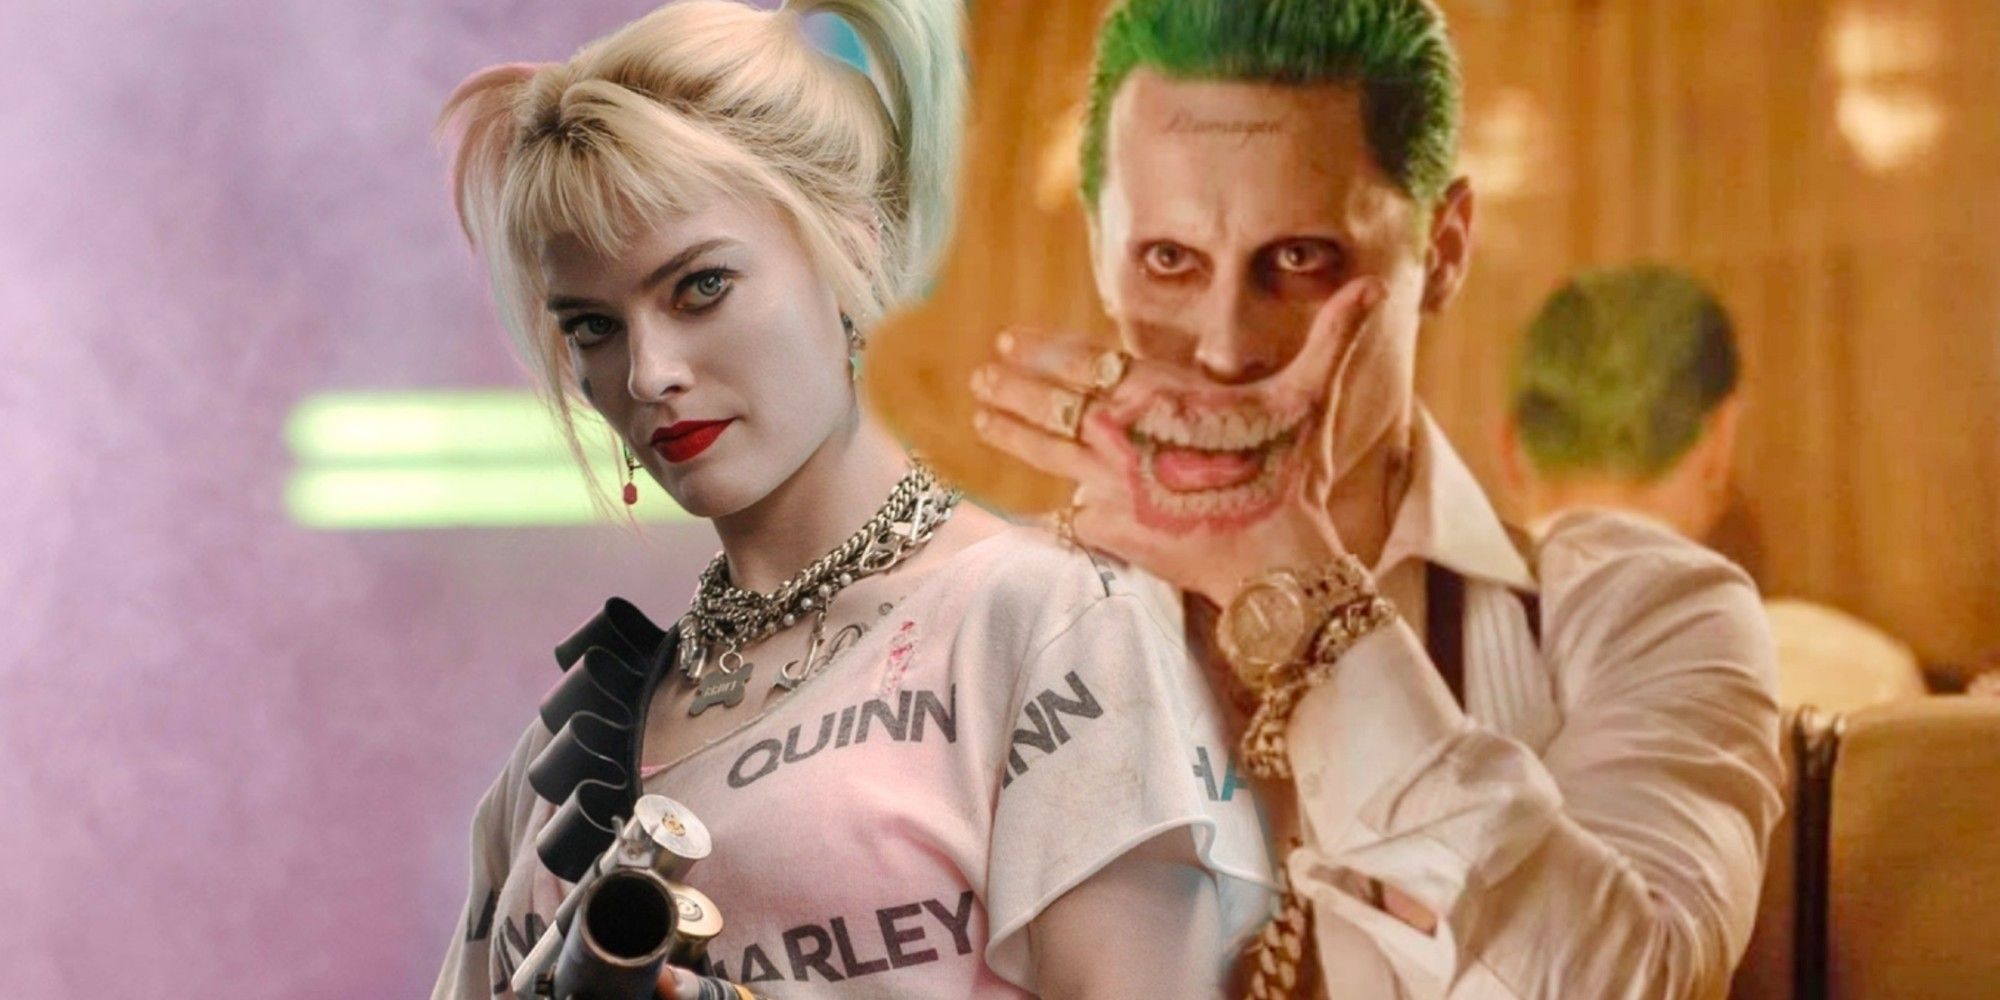 Birds of Prey: Harley Quinn's Emancipation Never Worked Without